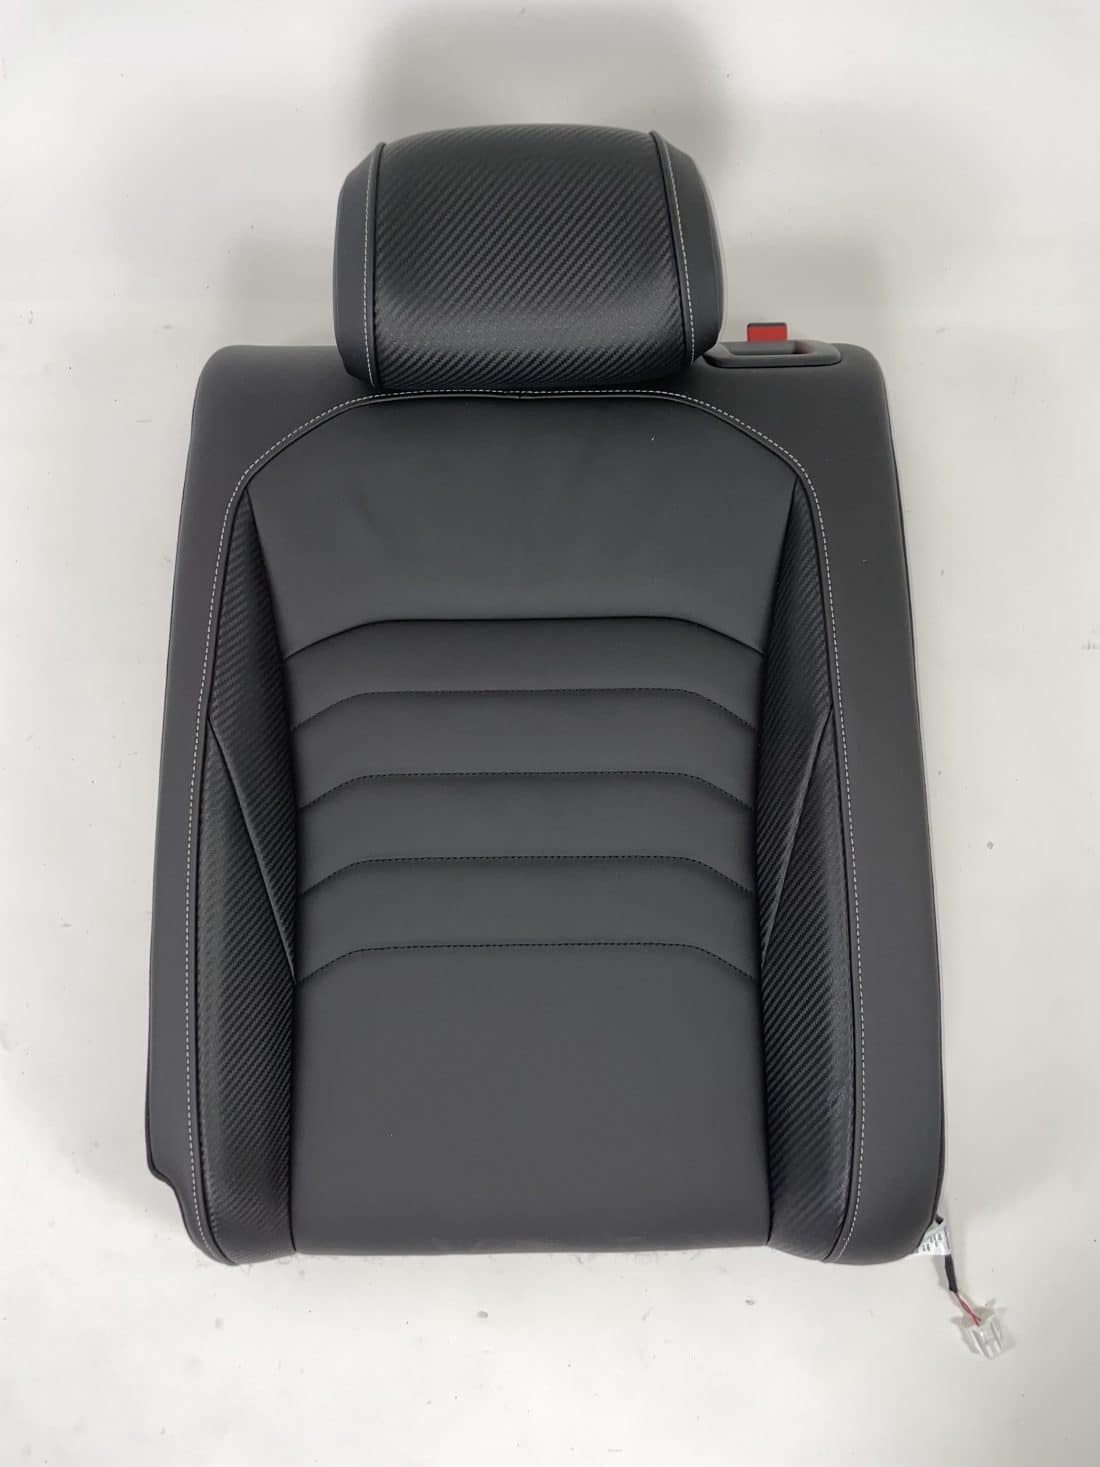 Trp Post Container Data Trp Post Id 9635 Interior Vw Golf 8 R Leather Black Grey Stitching Trp Post Container